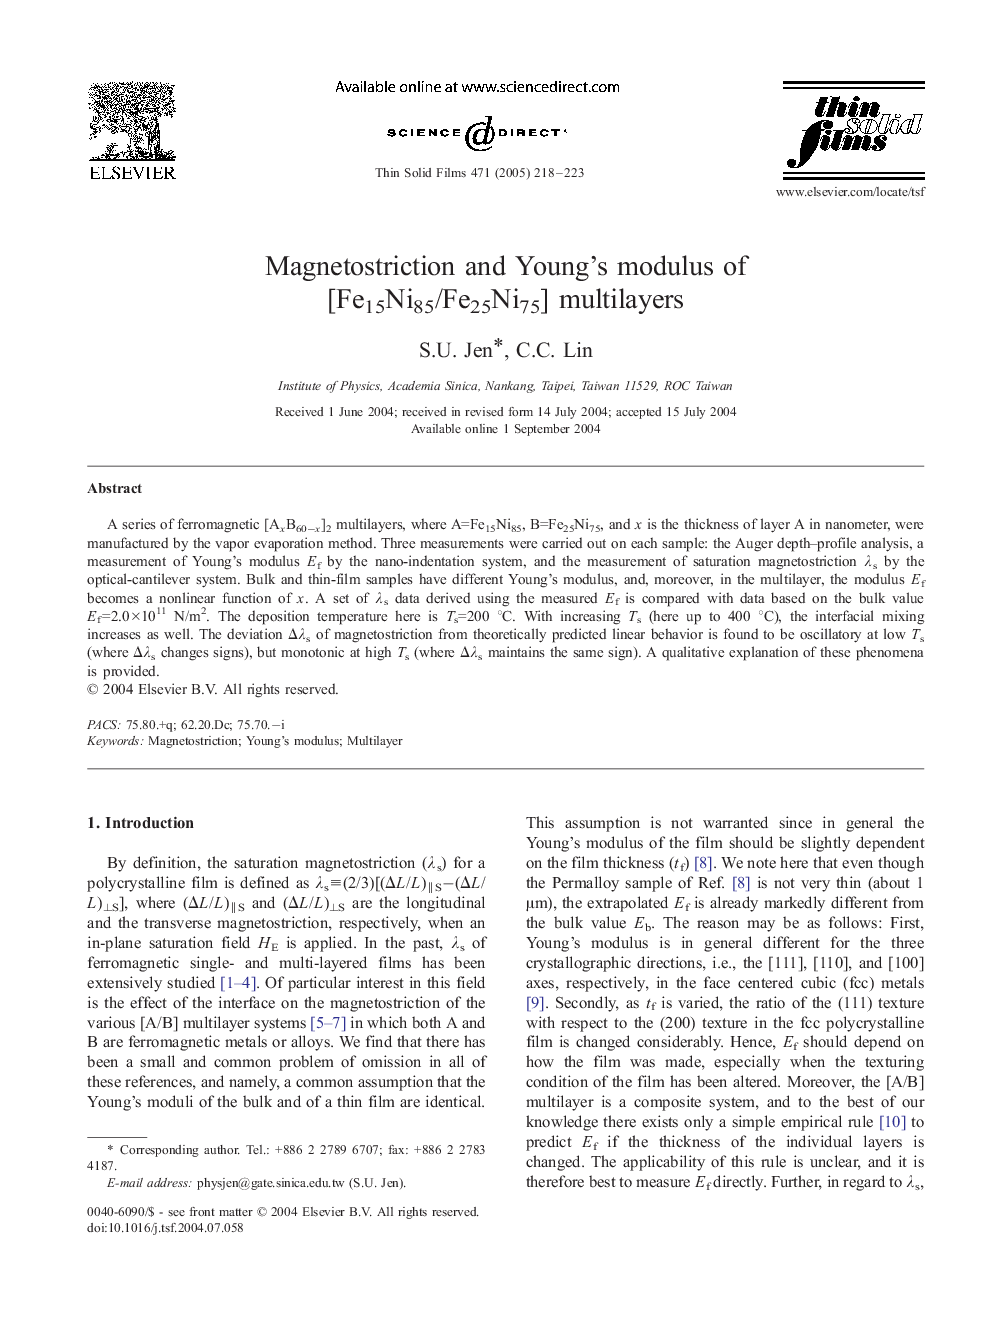 Magnetostriction and Young's modulus of [Fe15Ni85/Fe25Ni75] multilayers